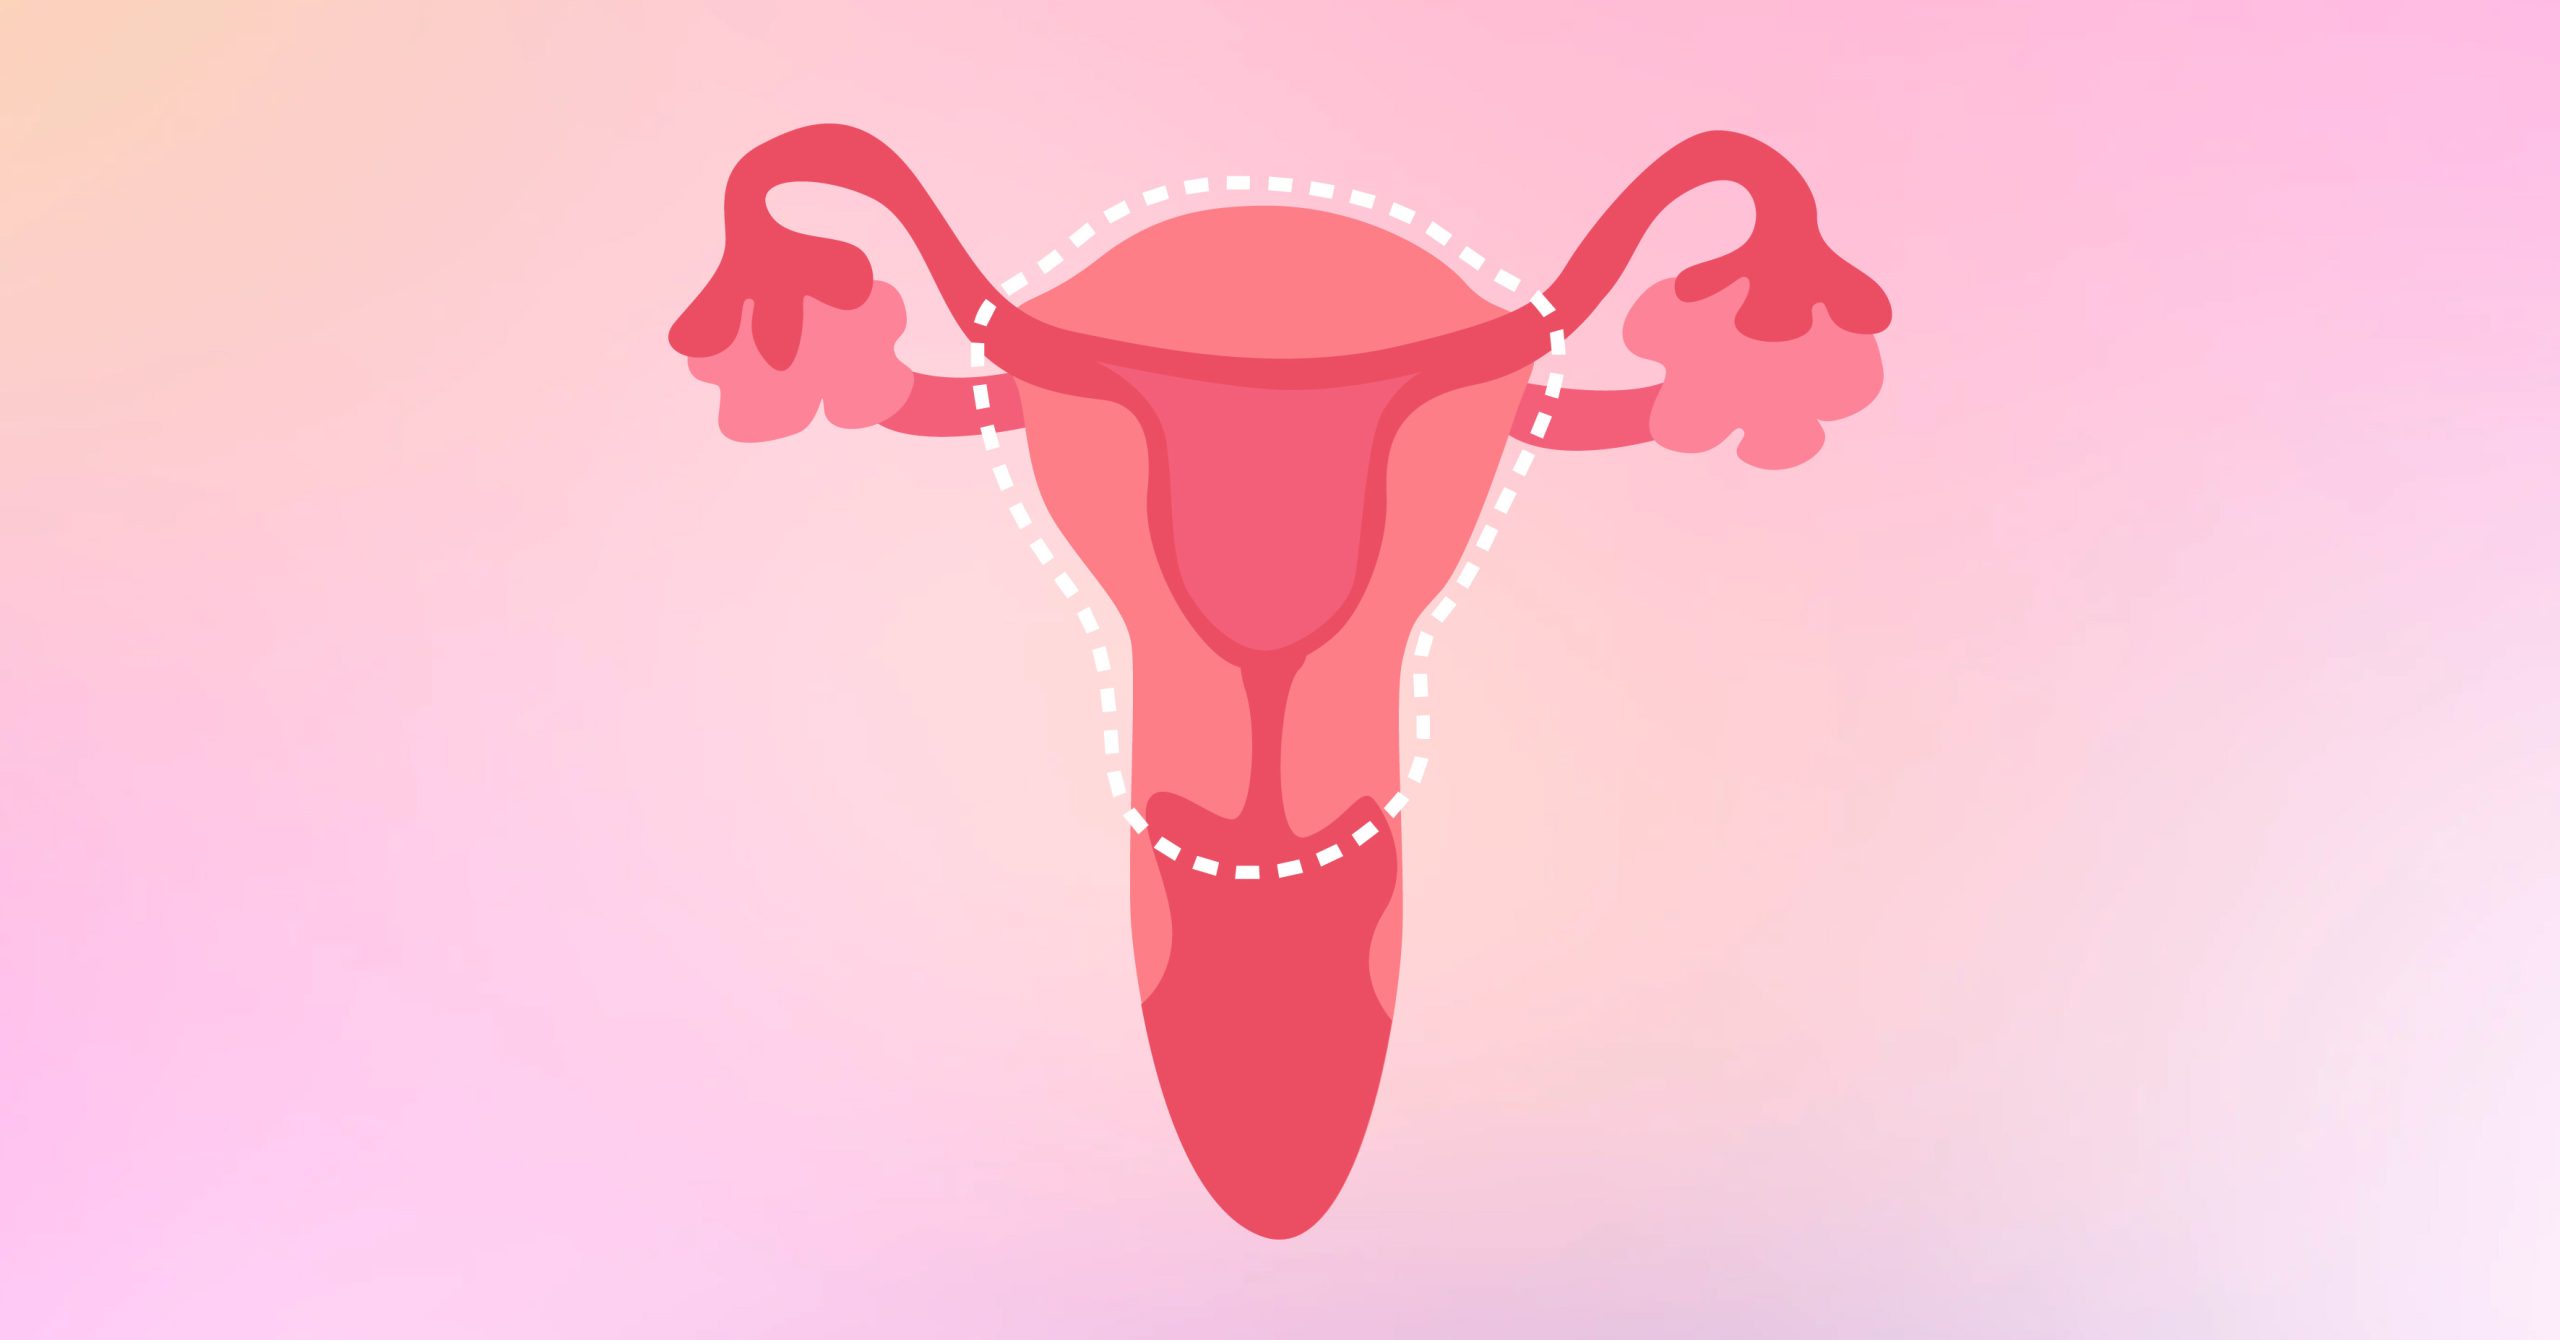 Hysterectomy 101: The Last of (Uter)us